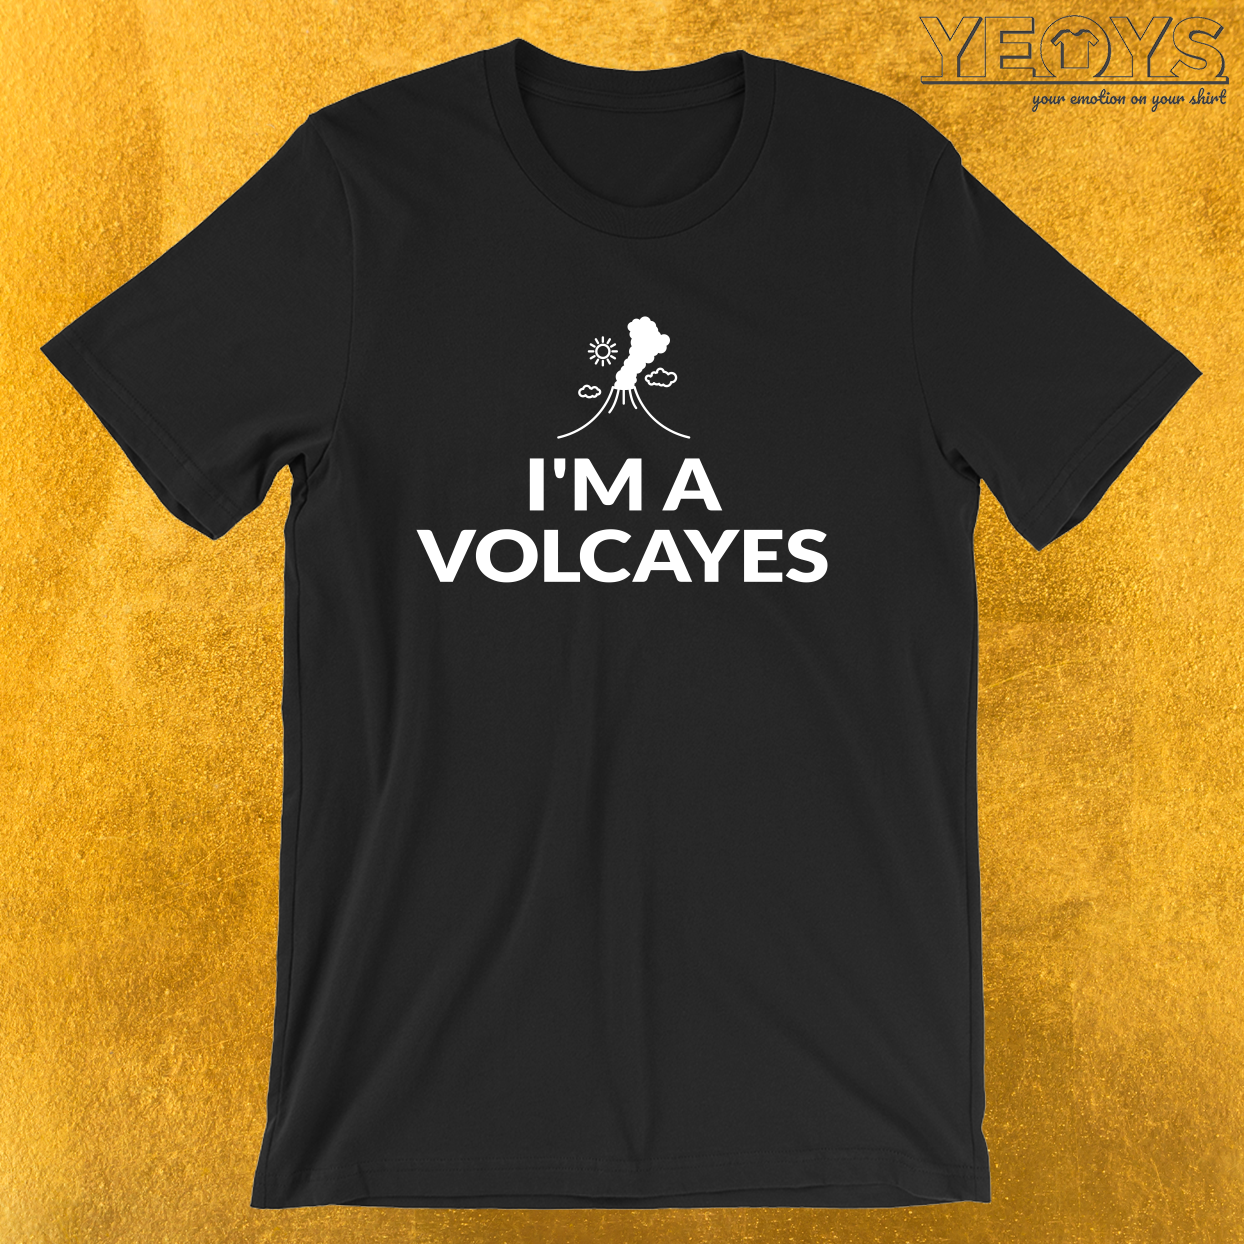 I’m A Volcayes – Funny Lava Volcano Tee